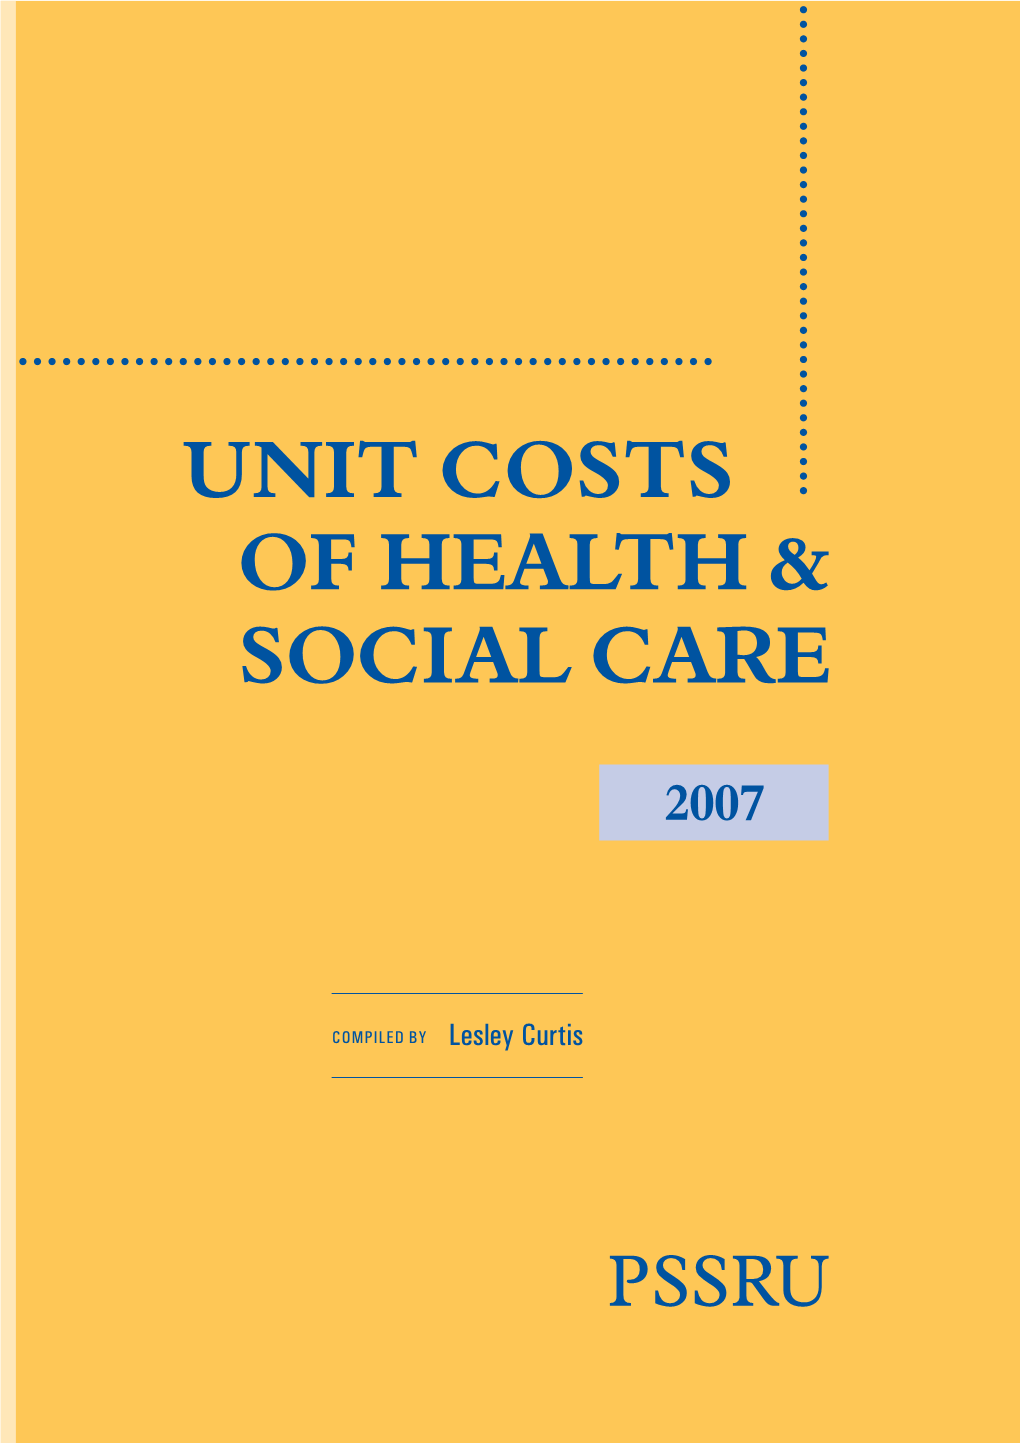 Unit Costs of Health and Social Care 2007 Compiled by Lesley Curtis © University of Kent, 2007